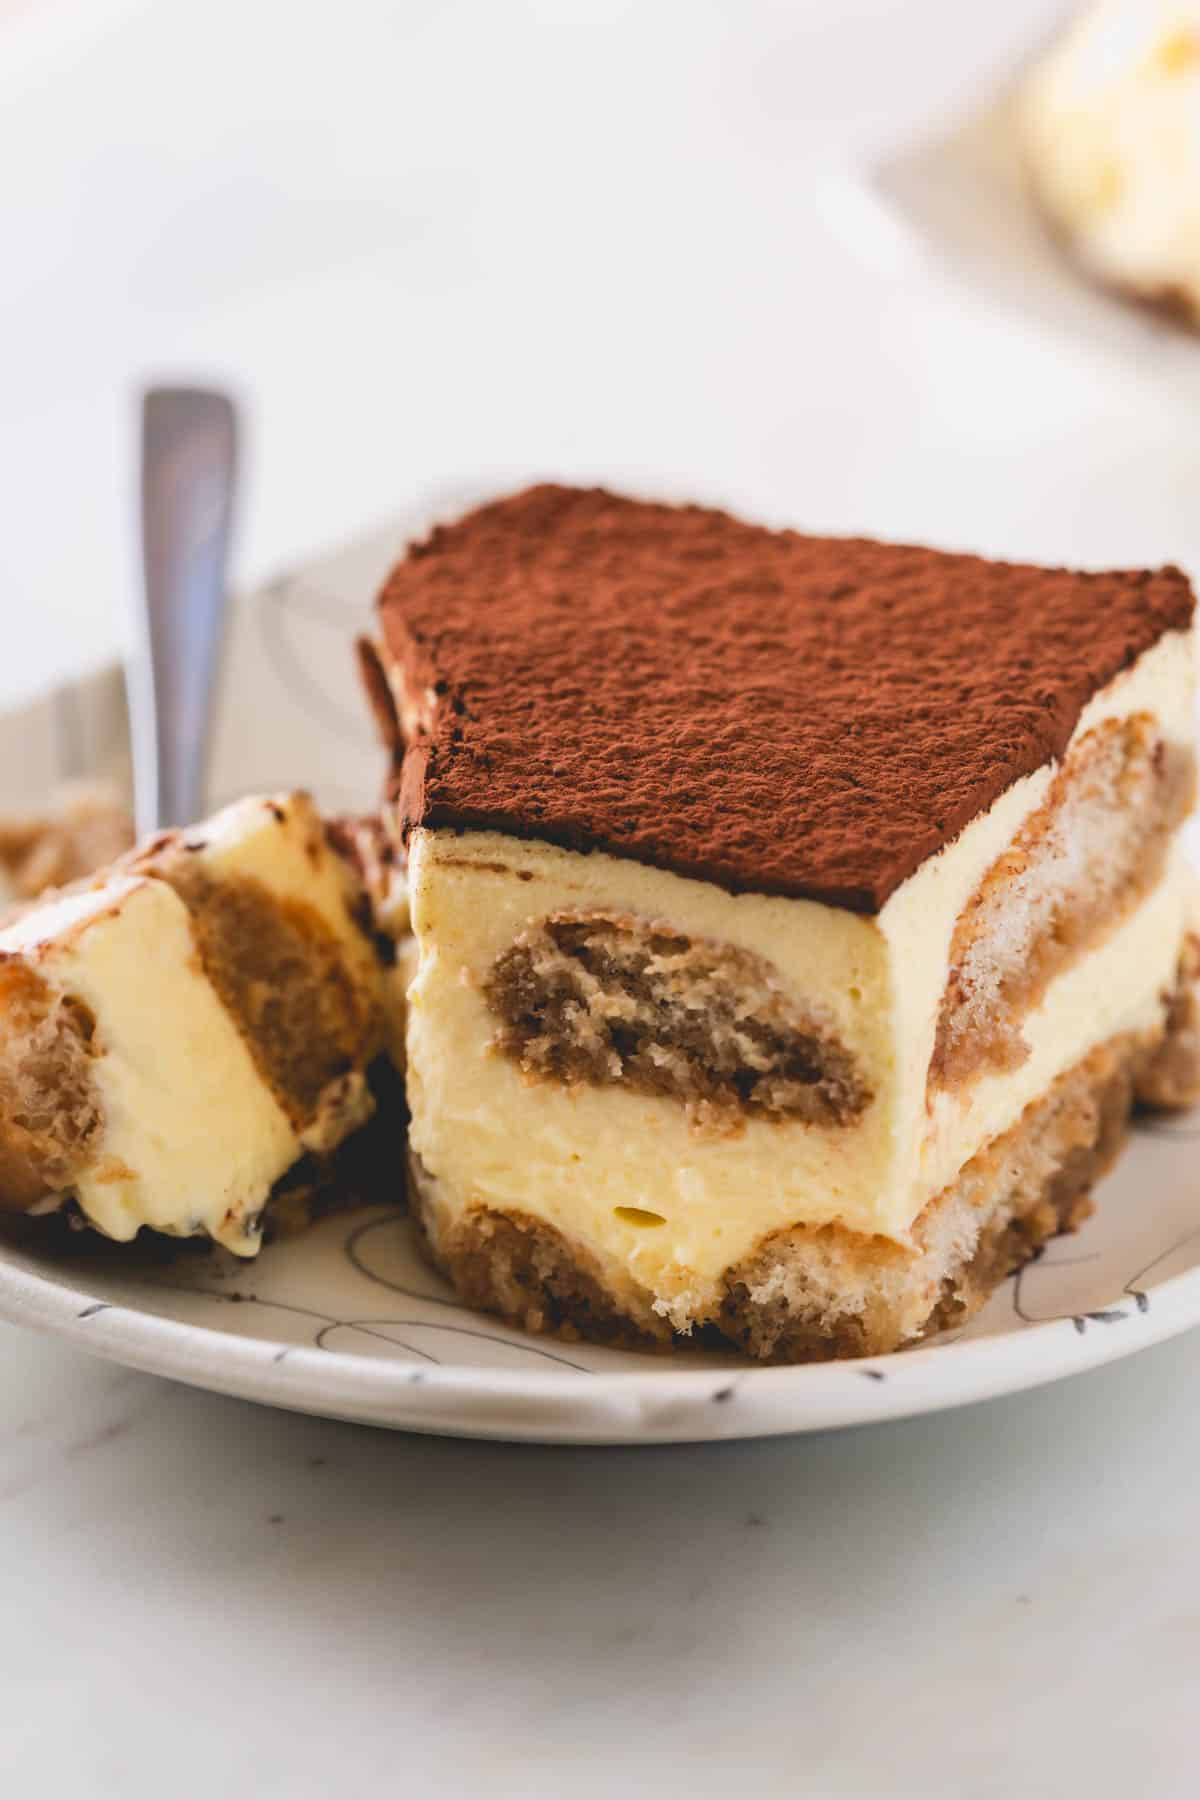 A piece of tiramisu on a plate with a fork holding the corner bite.